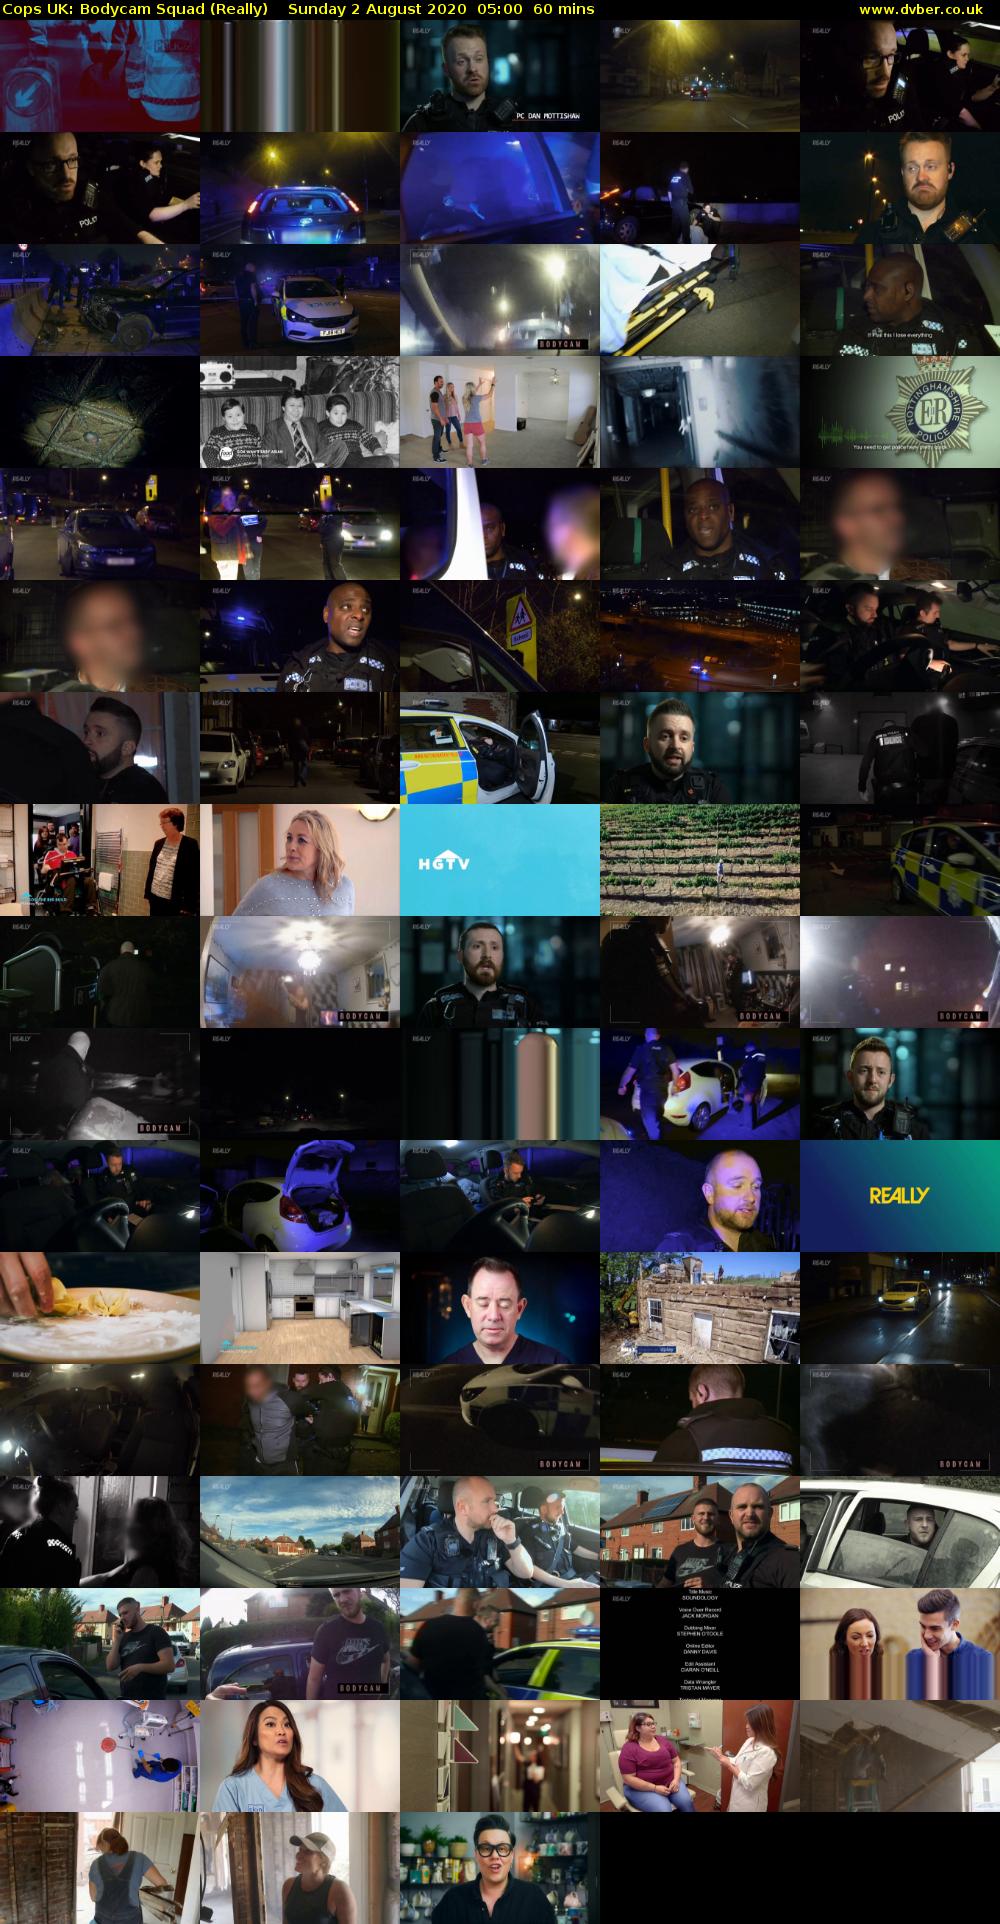 Cops UK: Bodycam Squad (Really) Sunday 2 August 2020 05:00 - 06:00